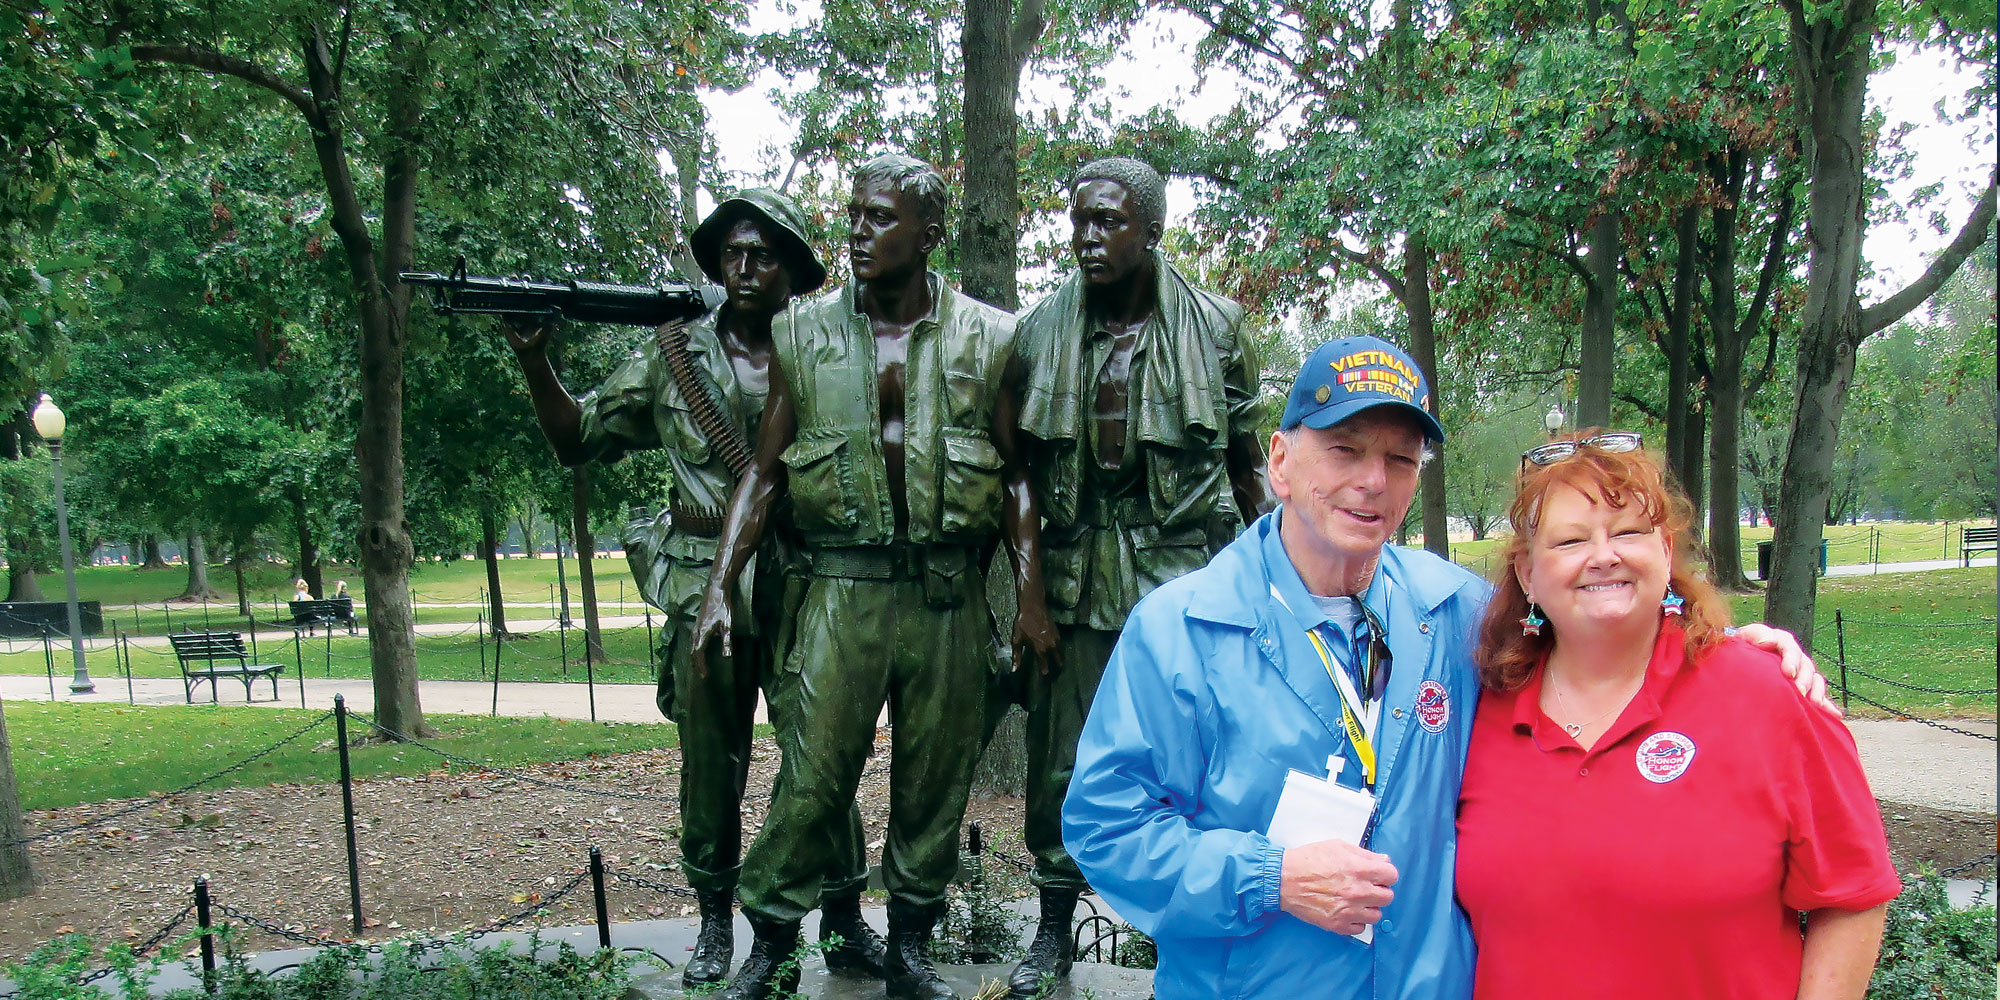 An older man wearing a blue Vietnam veteran hat and jacket poses with a red-headed woman in a red Honor Flight Network shirt in front of a green and black memorial statue of three Vietnam soldiers.